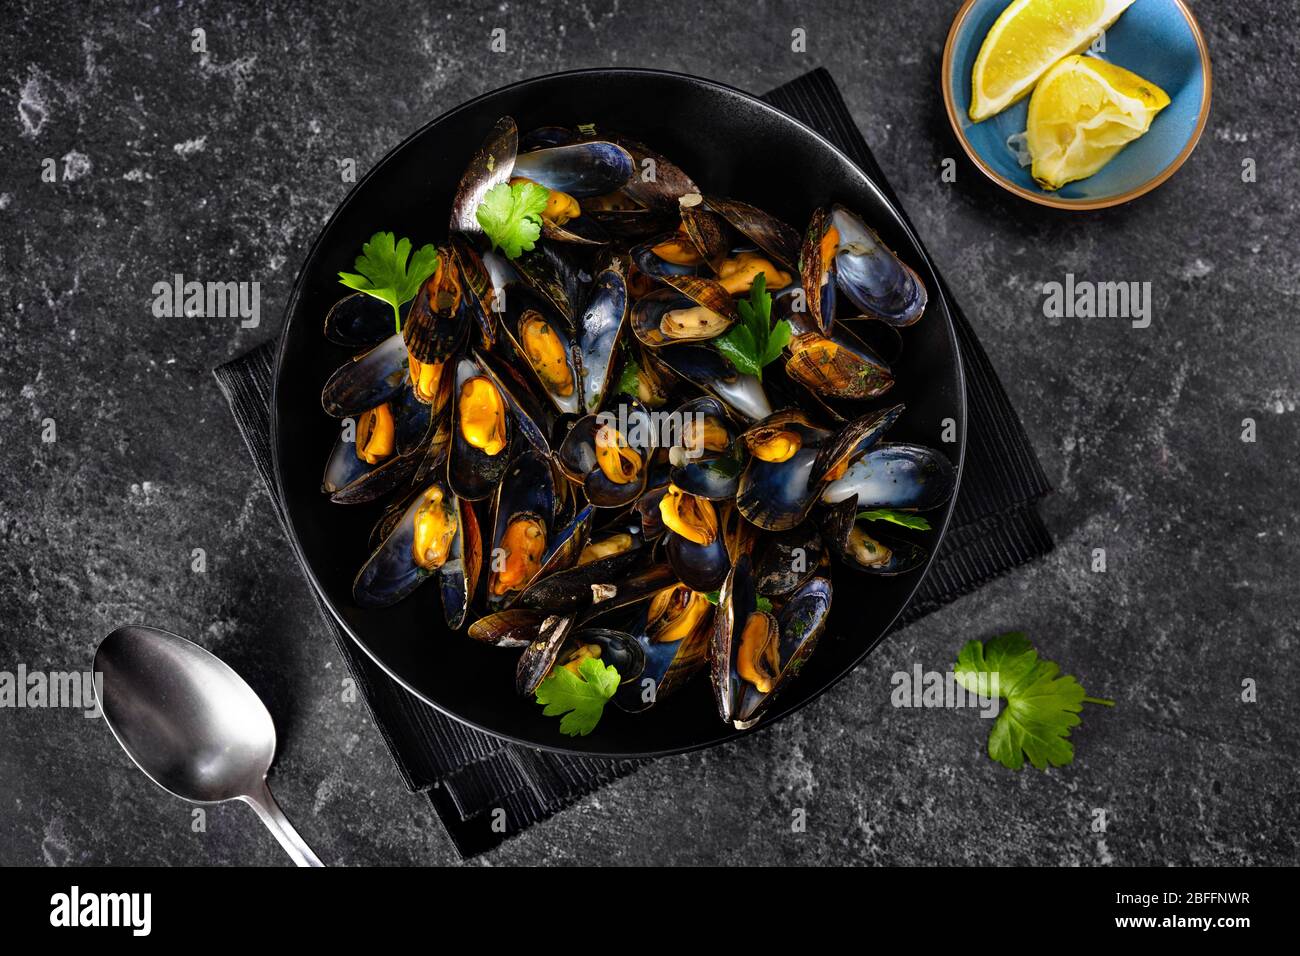 Close up of a black plate with mussels on black background Stock Photo